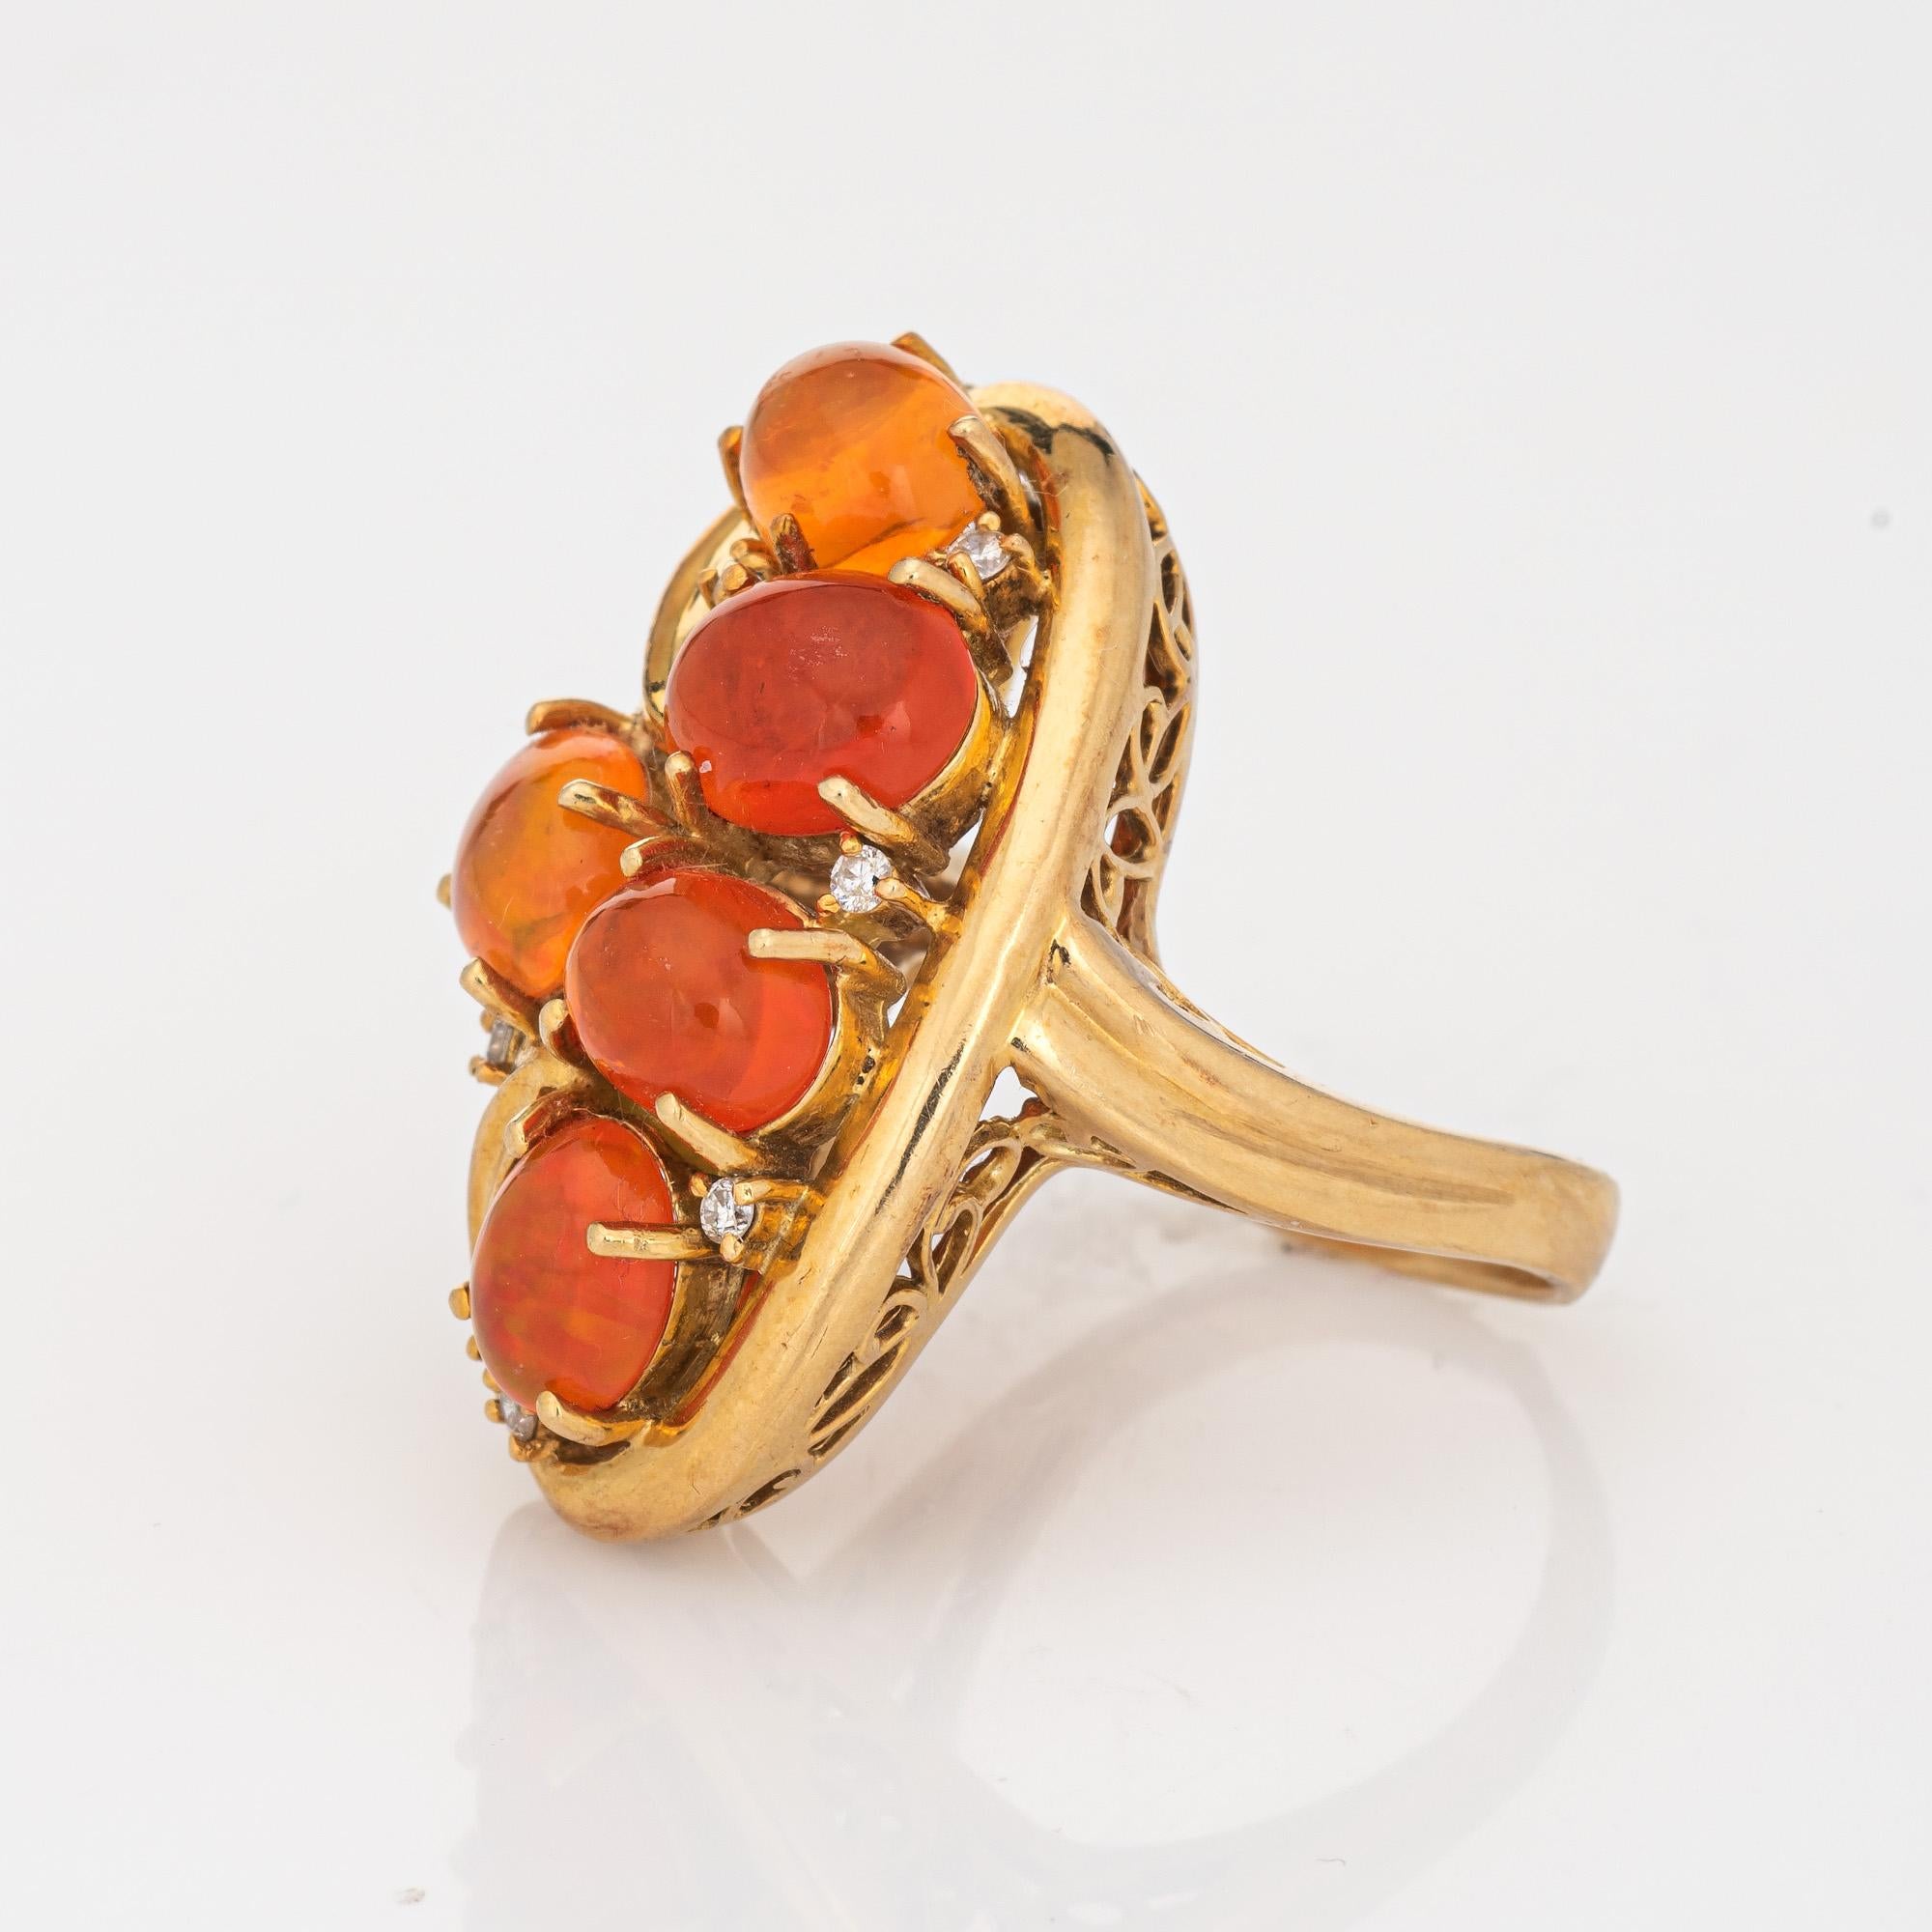 Cabochon Vintage 70s Fire Opal Diamond Ring 18k Yellow Gold Cluster Cocktail Jewelry 6.5